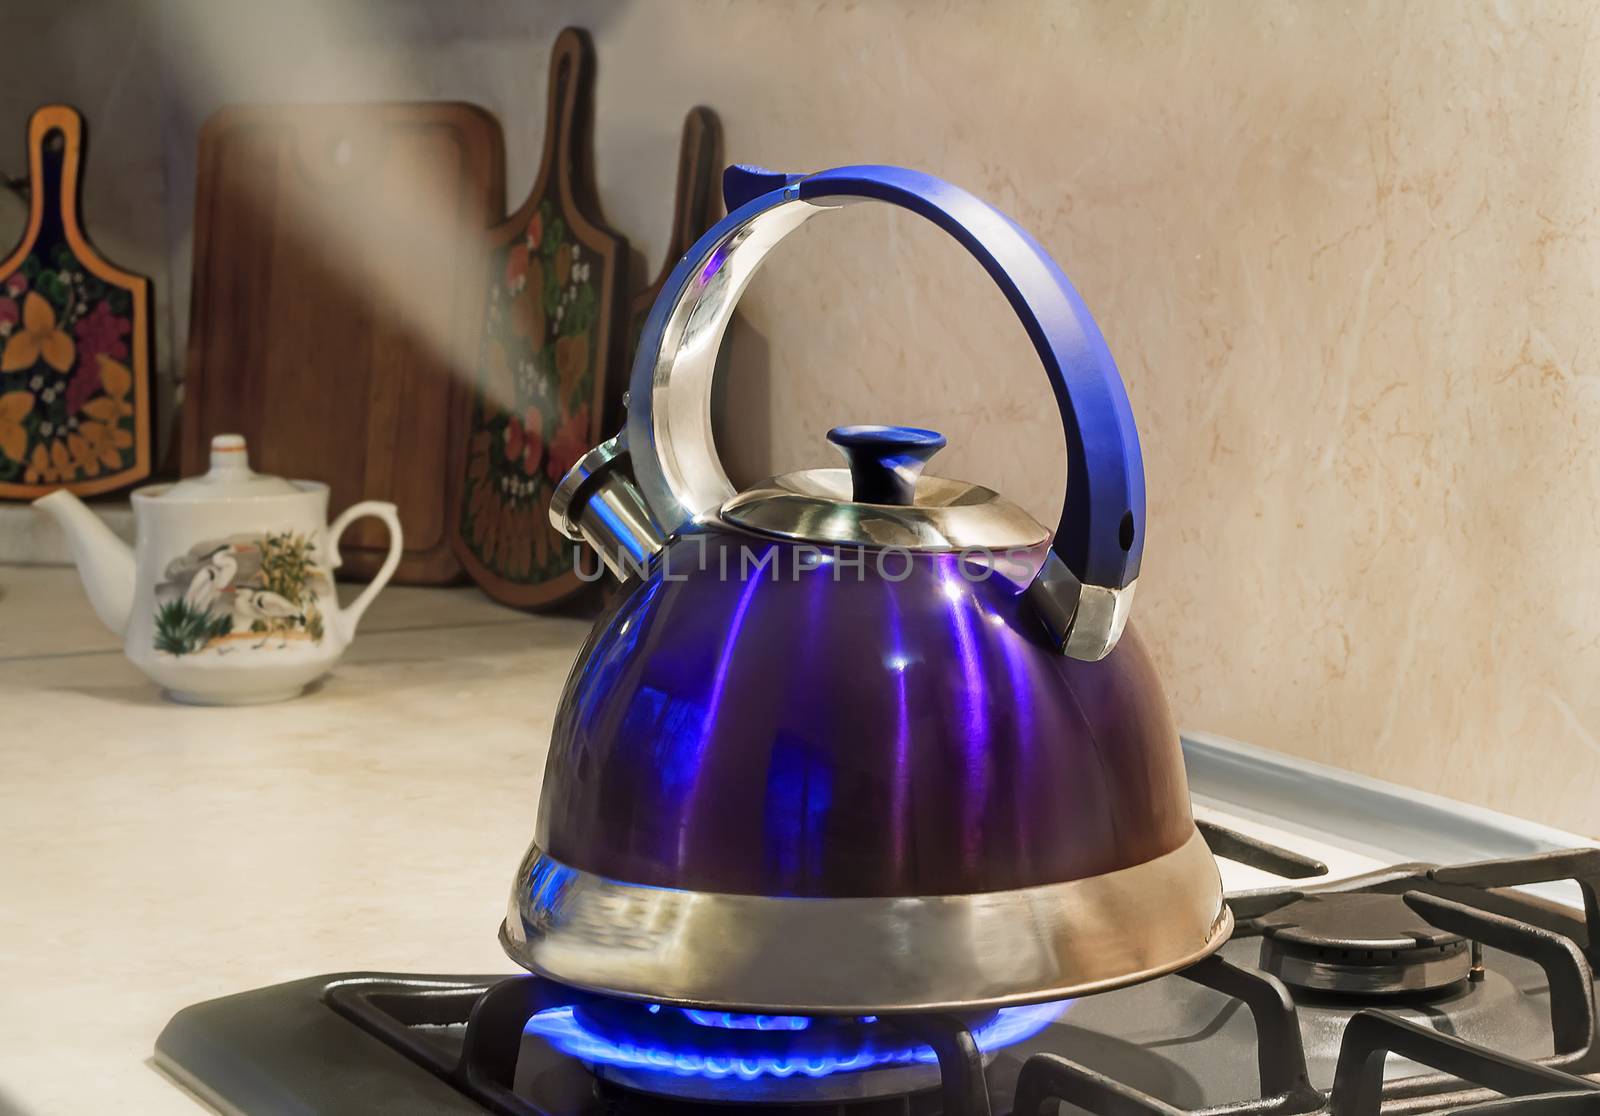 Blue kettle with a signal of boiling water and steam jet from the spout is on the burning gas stove